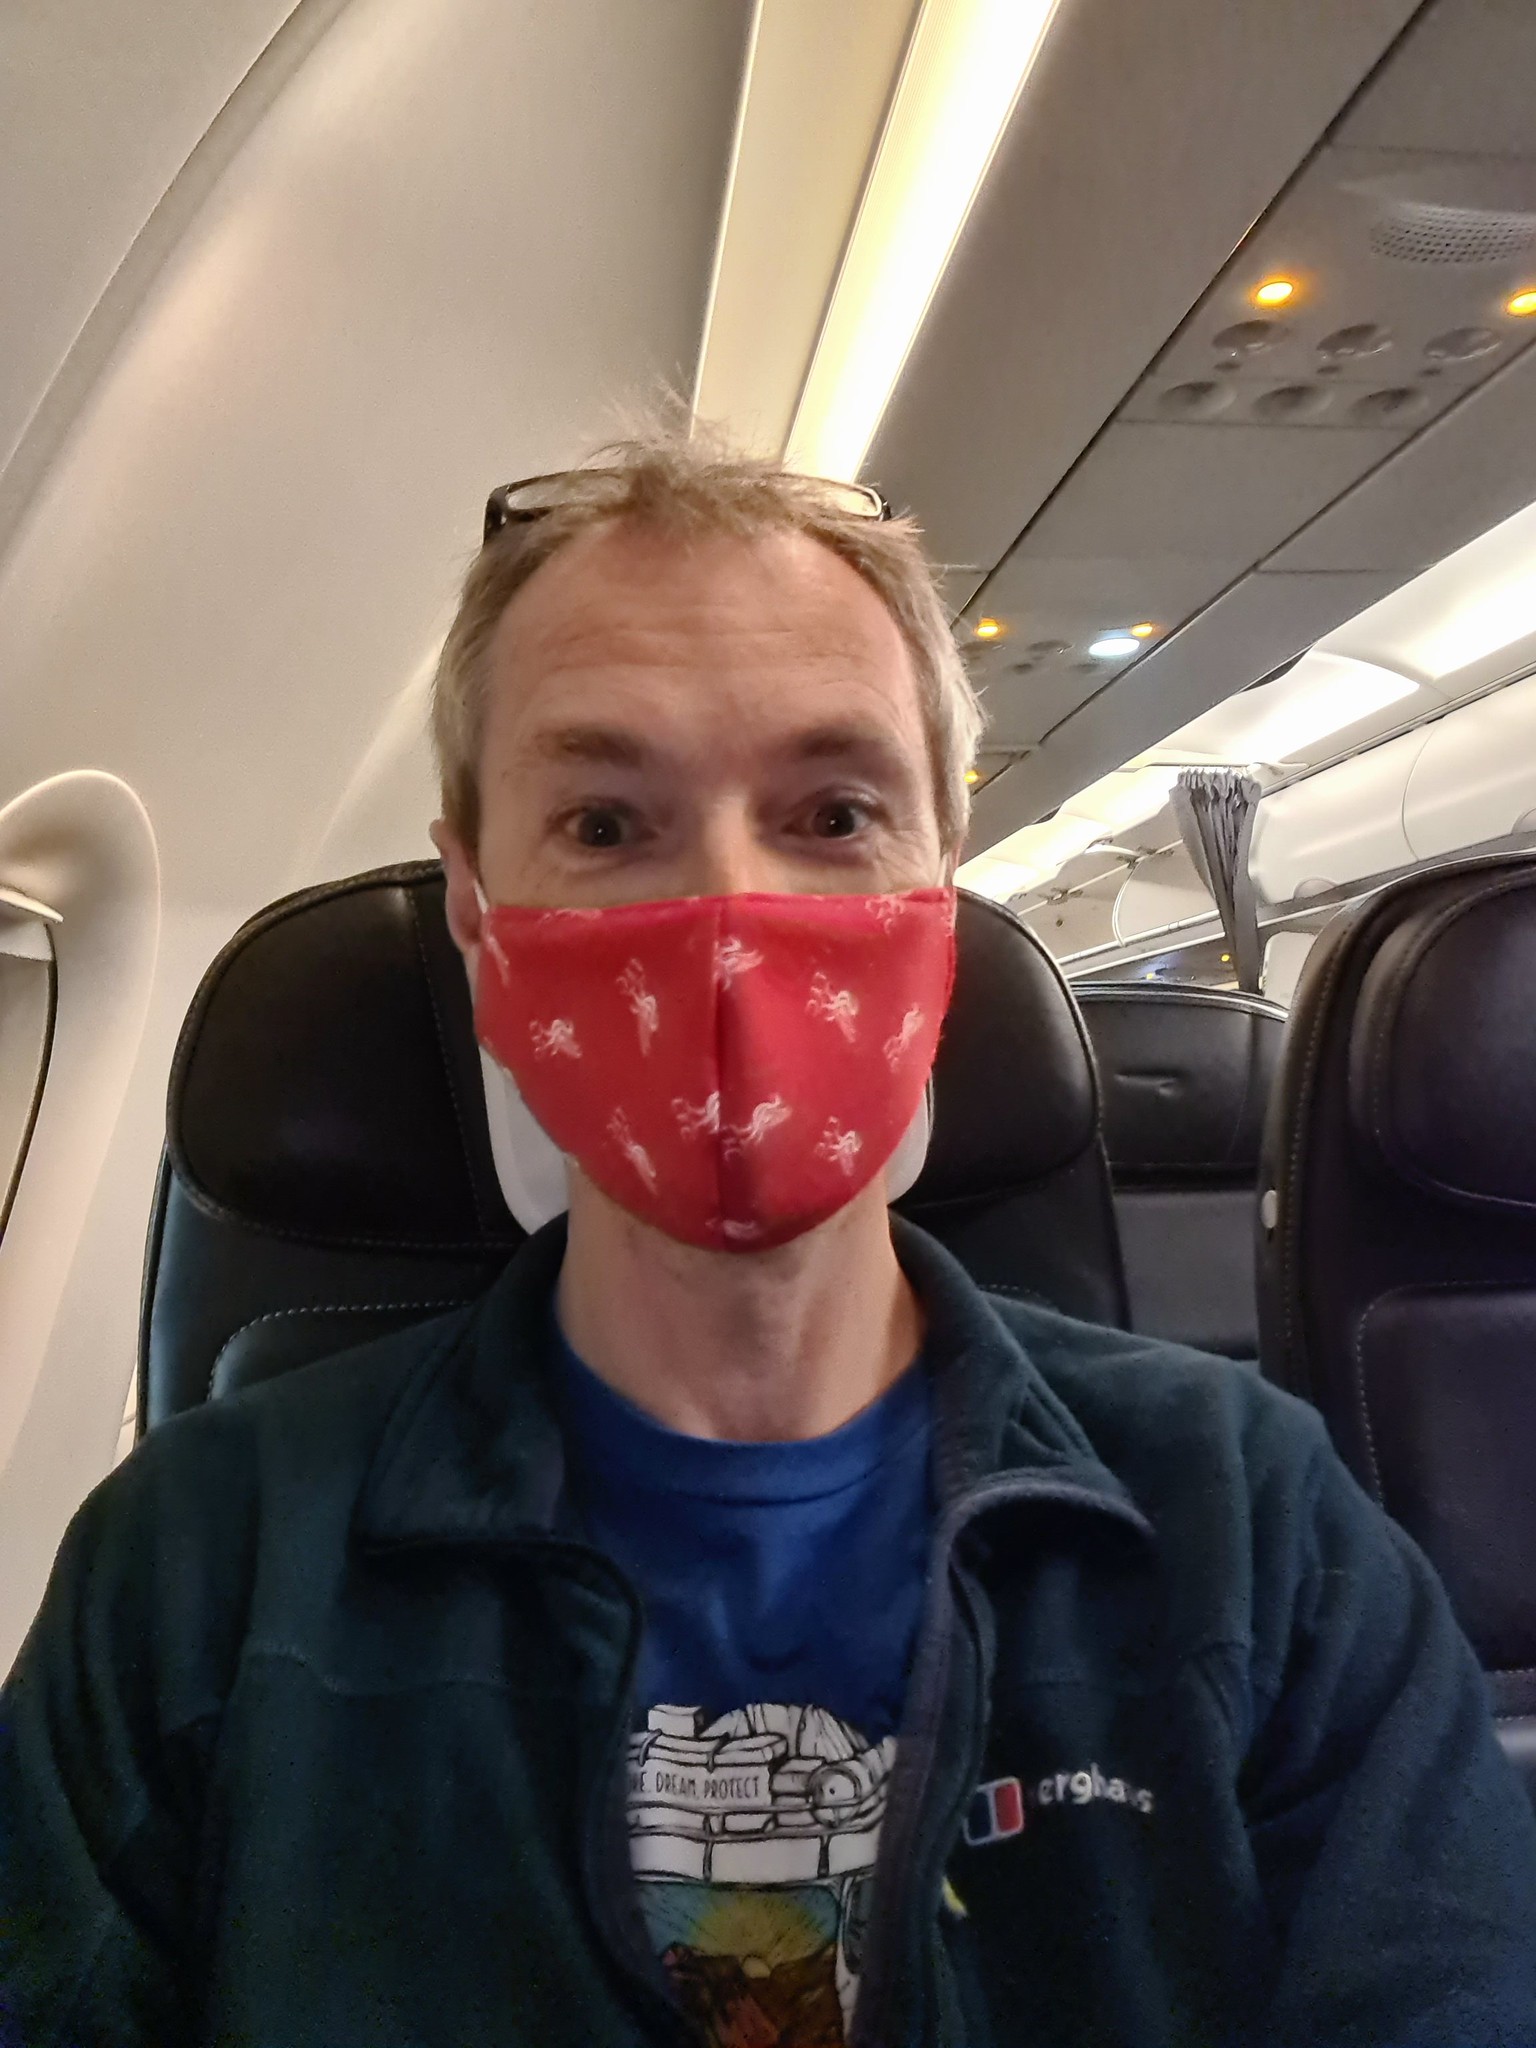 This is what flying is like now - masks required